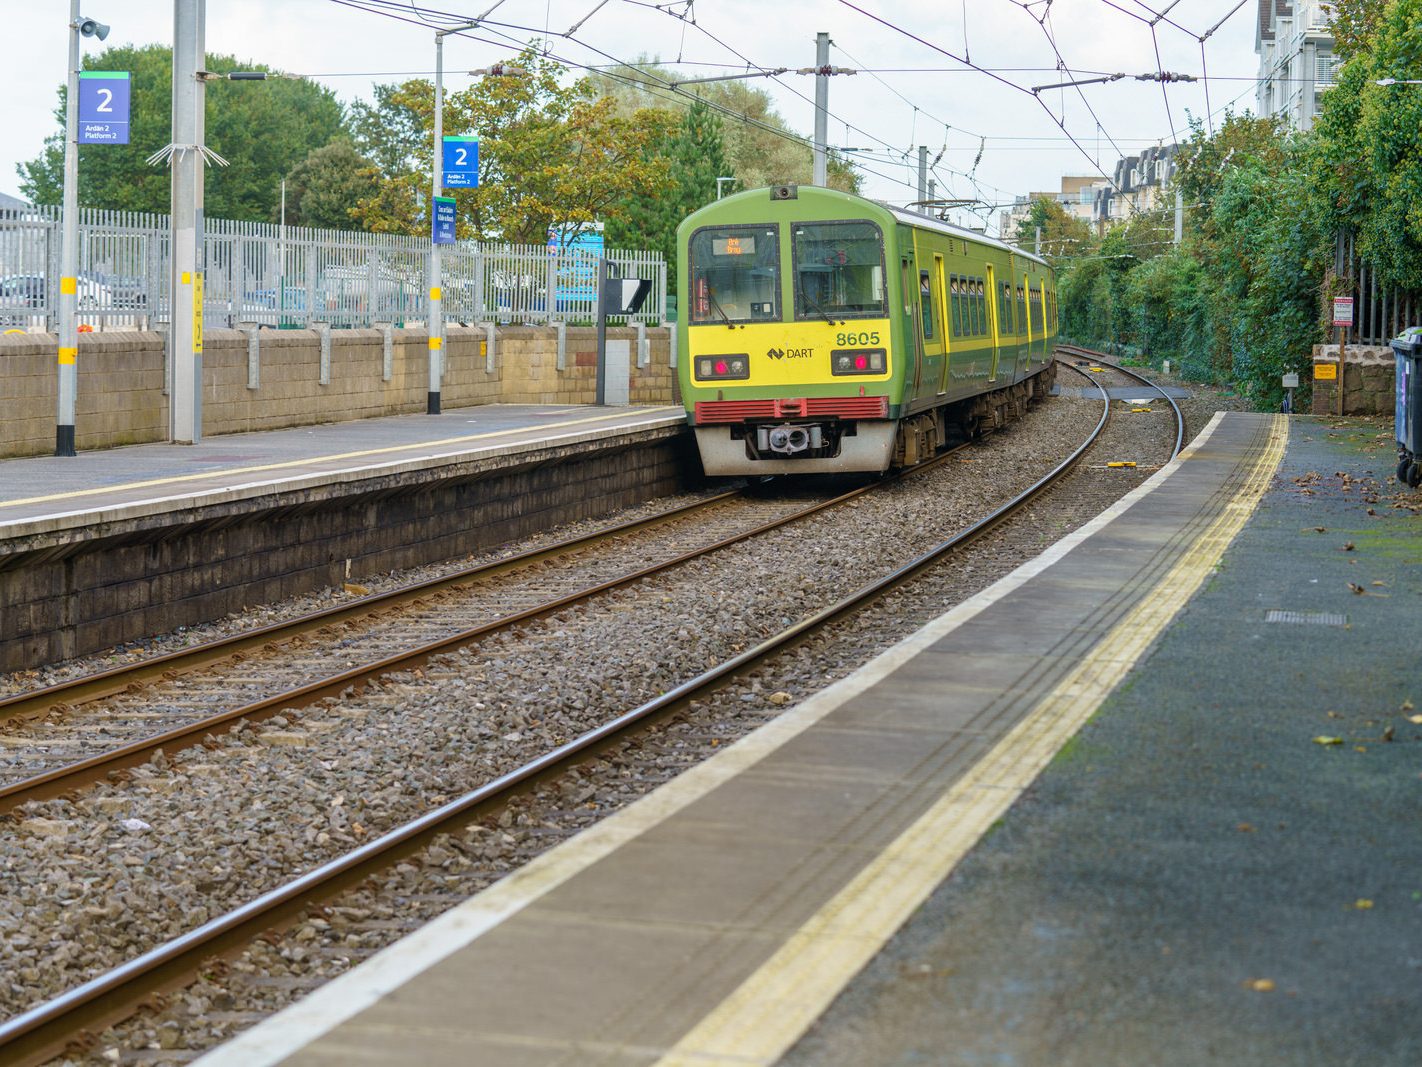 THE BEST STATION IF YOU PLAN THE VISIT DUN LAOGHAIRE WEST PIER [SALTHILL AND MONKSTOWN] 010